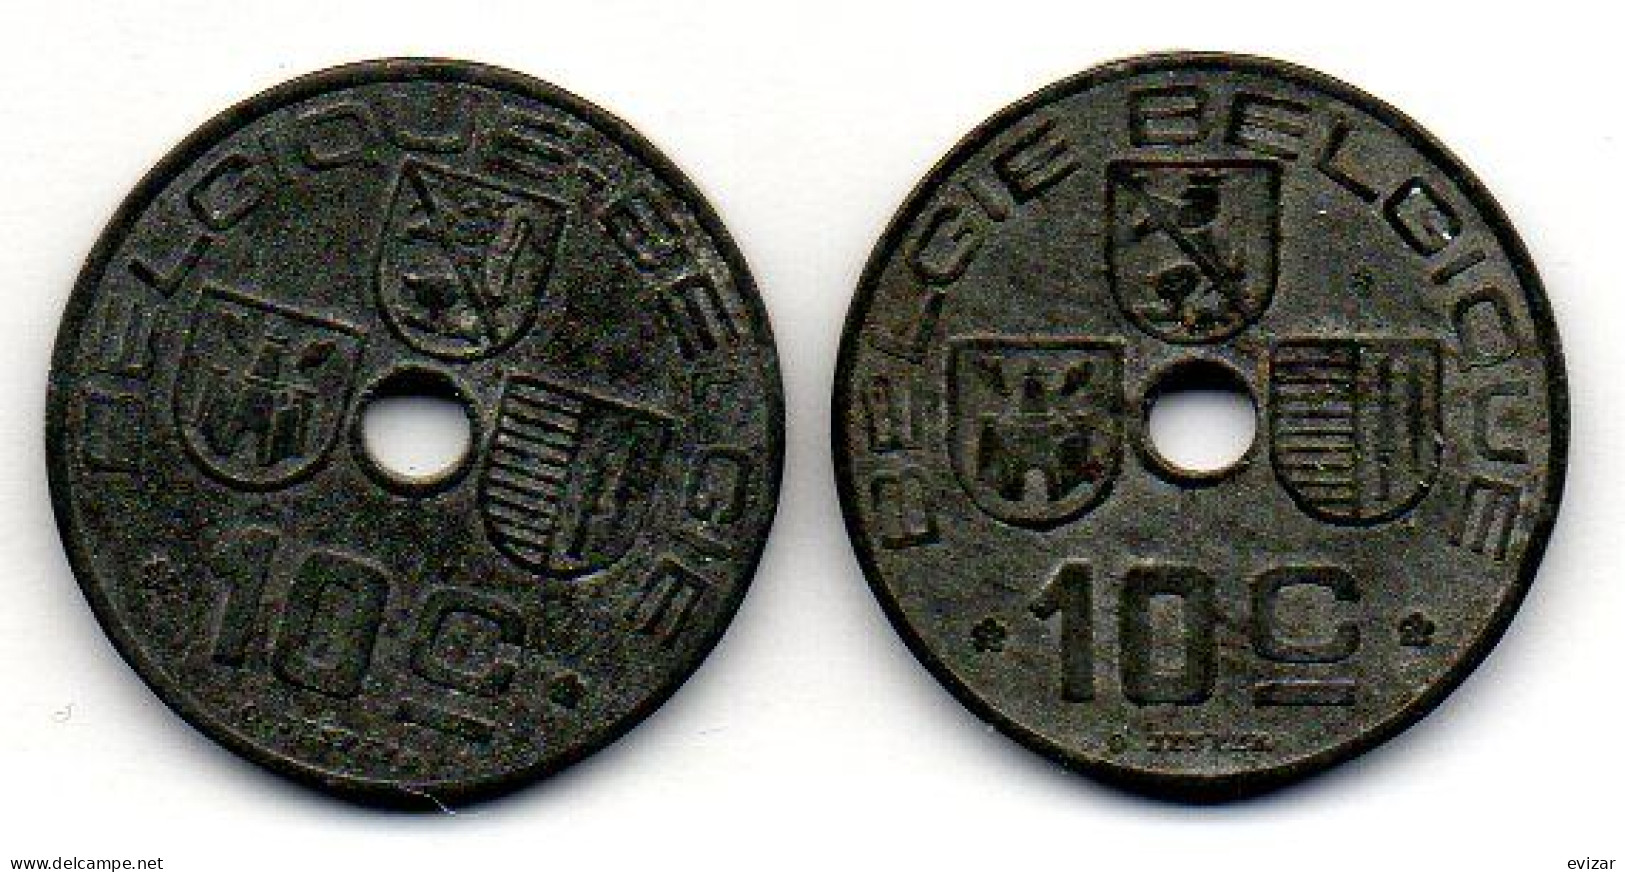 BELGIUM - GERMAN OCCUPATION WWII - Set Of Two Coins 10 Centimes, Zinc, Year 1942-44, KM #125, 126, French & Dutch Legend - 10 Cents